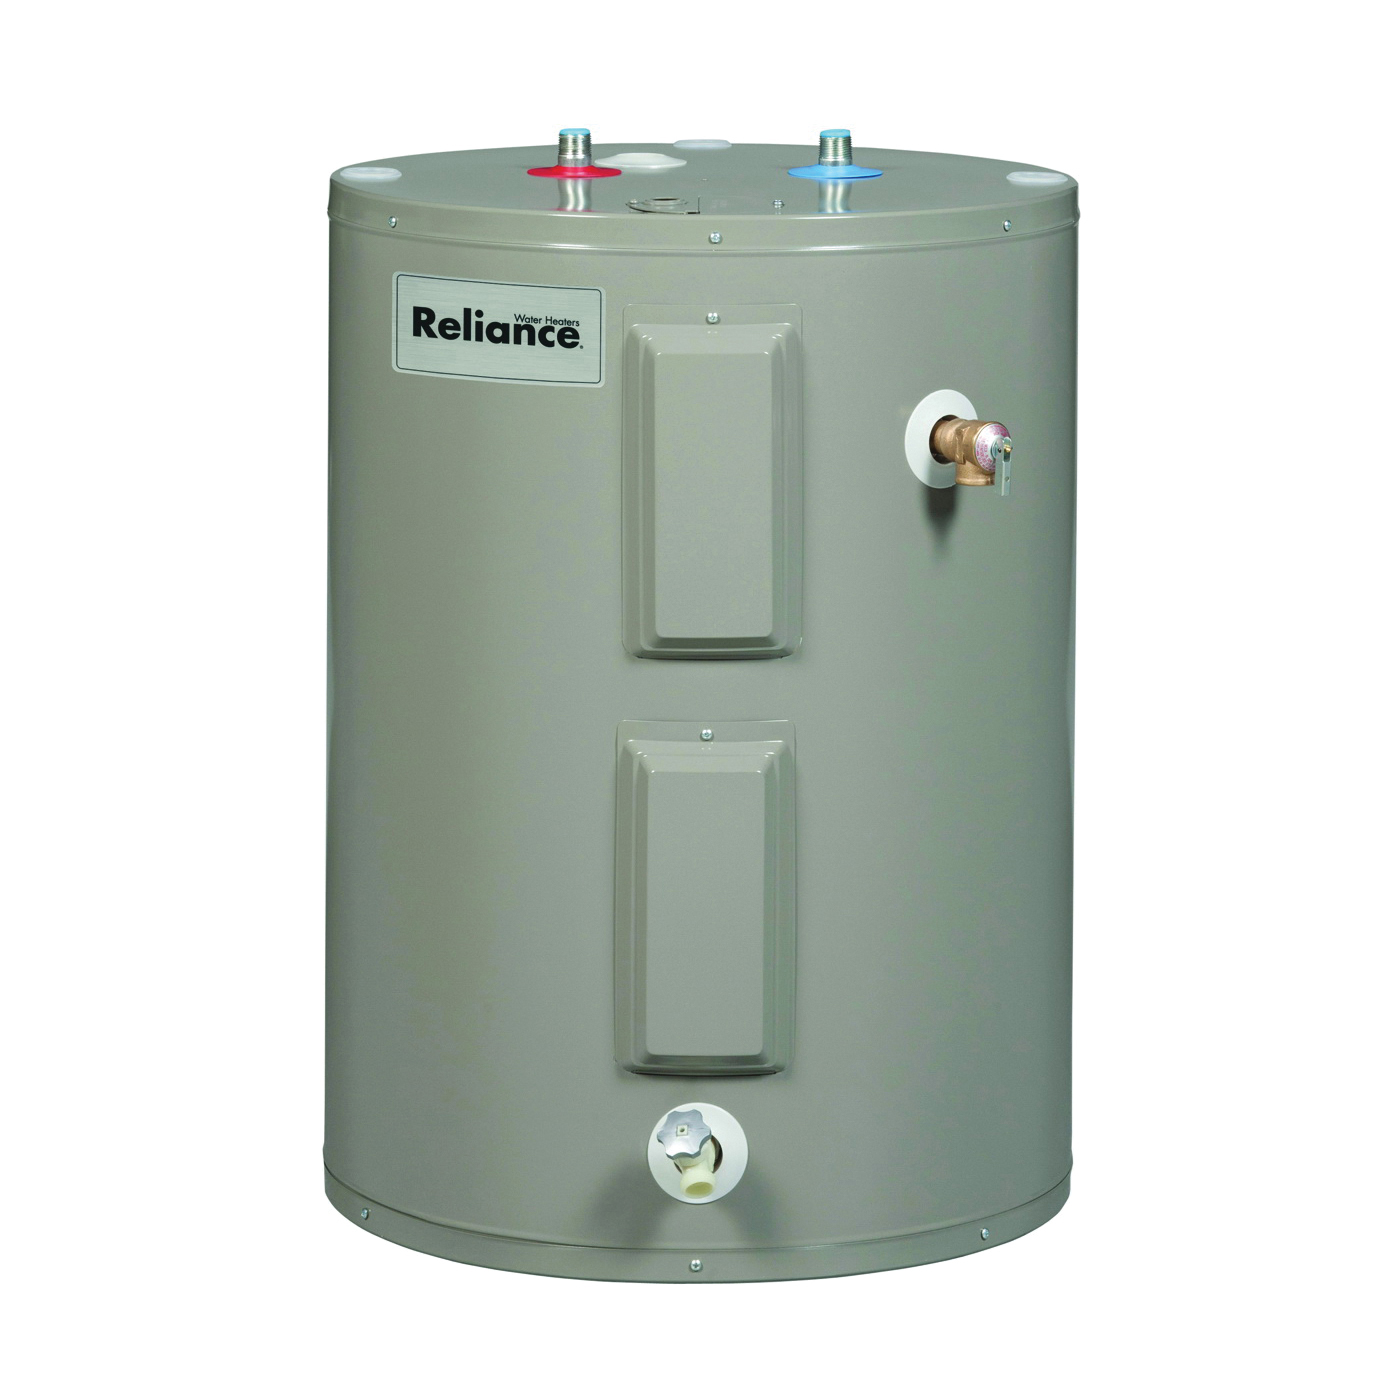 6 30 EORS Electric Water Heater, 30 A, 240 V, 6000 W, 30 gal Tank, 89 % Energy Efficiency